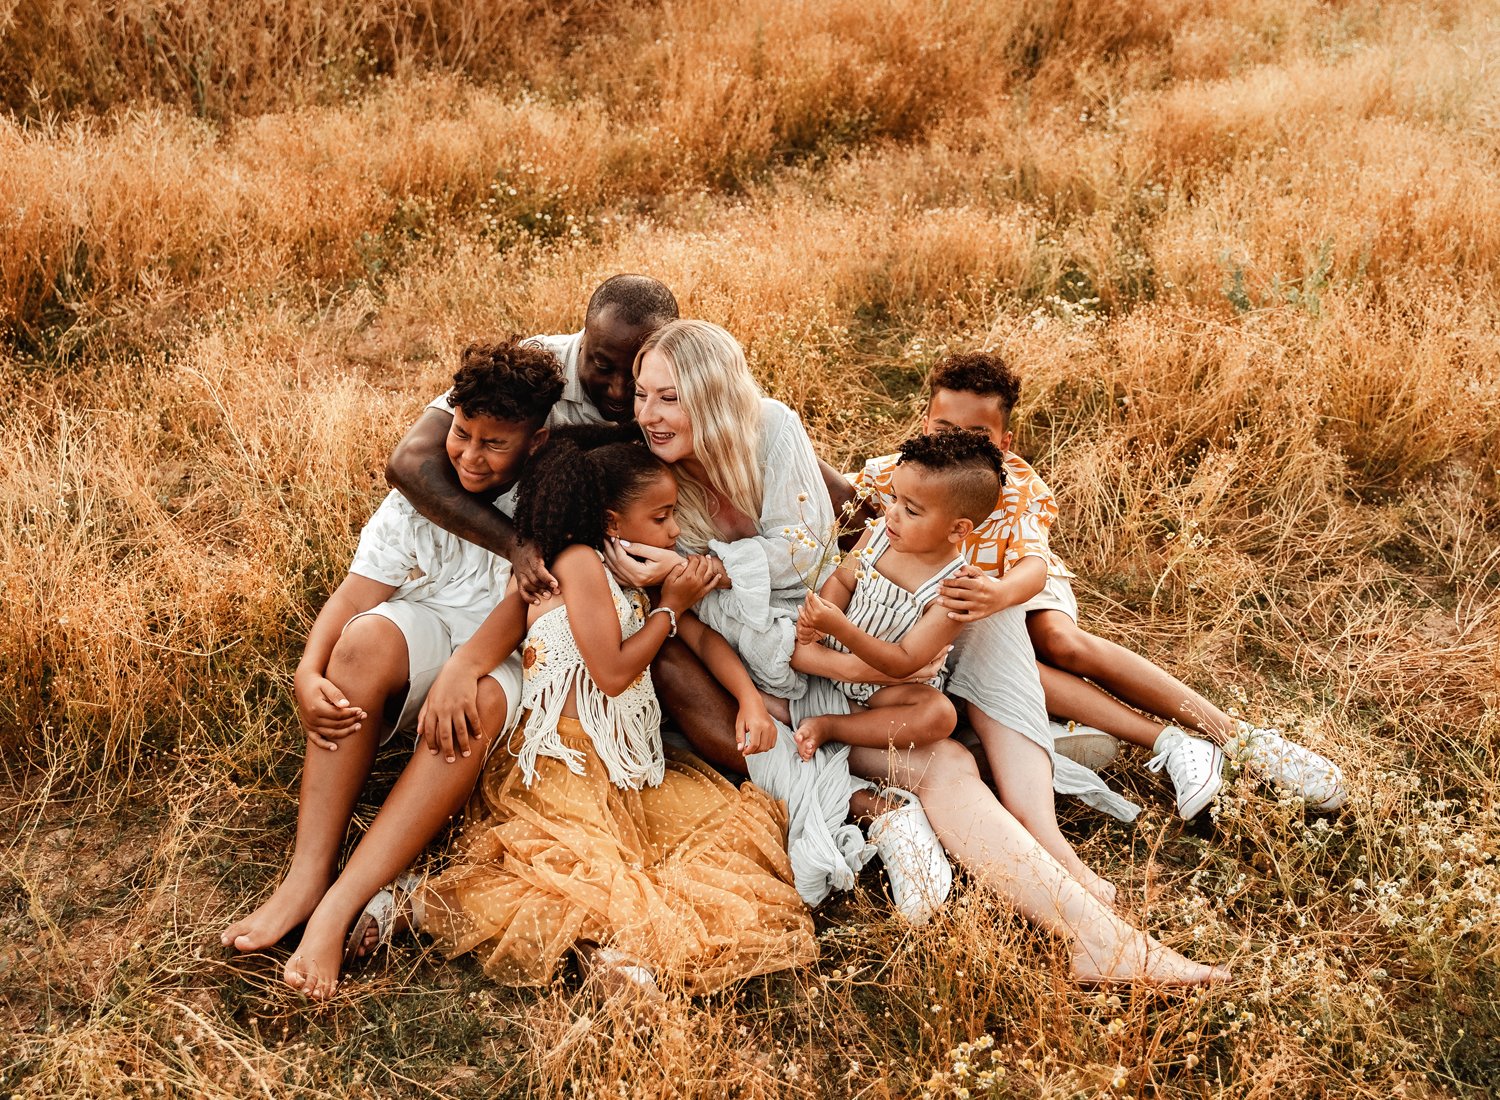 emotive-storytelling-summer-session-of-young-mixed-family-with-young-kids-at-sunset-in-german-country-side-in-ramstein-kmc-by-sarah-havens (7).jpg